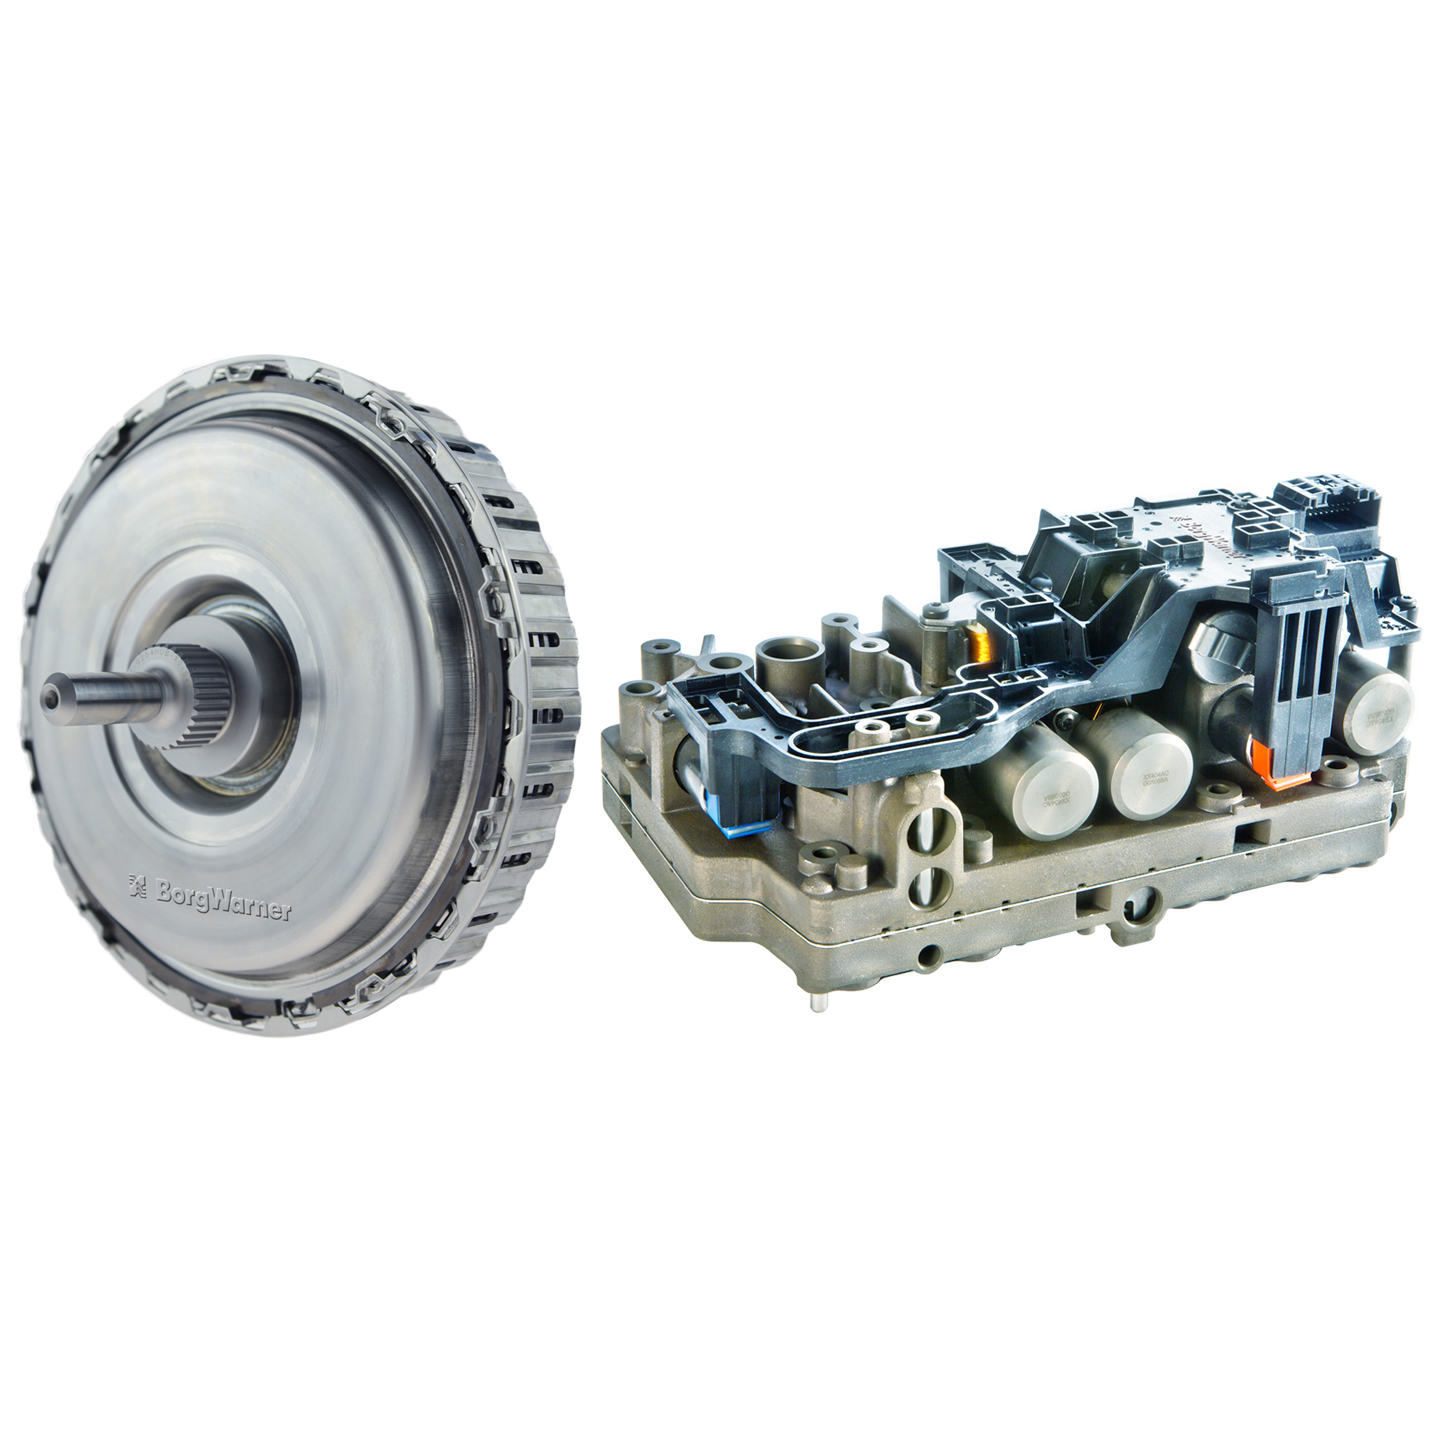 BorgWarner’s advanced DualTronicTM clutch and control modules contribute to improved fuel efficiency and dynamic performance for numerous vehicles from Great Wall Motors.